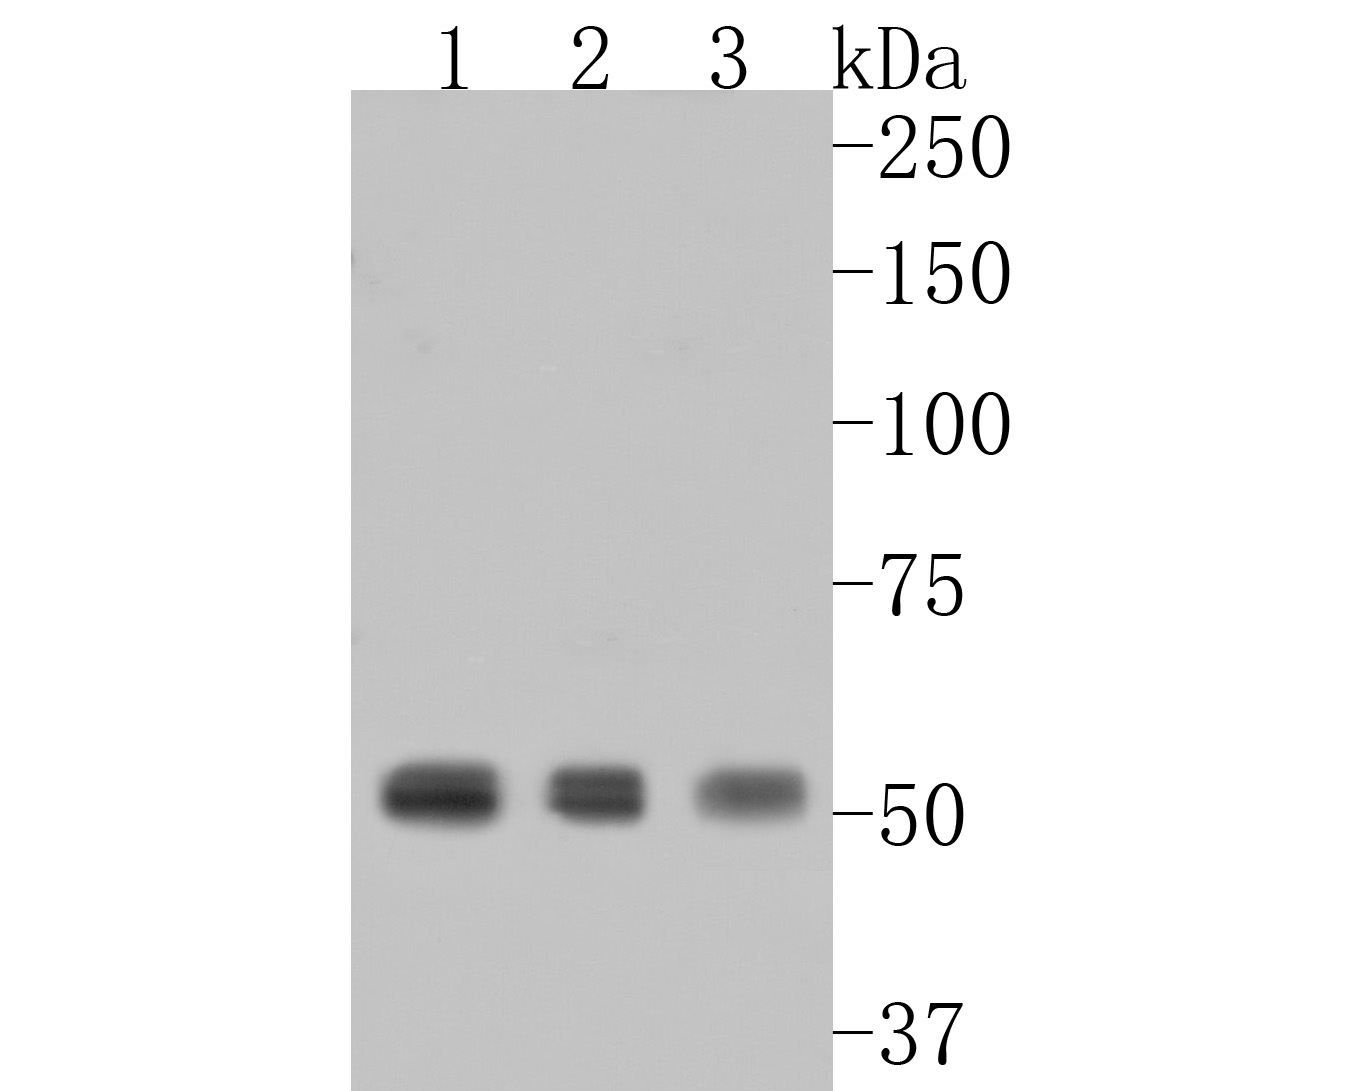 Western blot analysis of RBBP7 on different lysates. Proteins were transferred to a PVDF membrane and blocked with 5% BSA in PBS for 1 hour at room temperature. The primary antibody (HA500155, 1/1,000) was used in 5% BSA at room temperature for 2 hours. Goat Anti-Rabbit IgG - HRP Secondary Antibody (HA1001) at 1:200,000 dilution was used for 1 hour at room temperature.<br />
Positive control: <br />
Lane 1: HepG2 cell lysate<br />
Lane 2: Hela cell lysate<br />
Lane 3: NIH/3T3 cell lysate